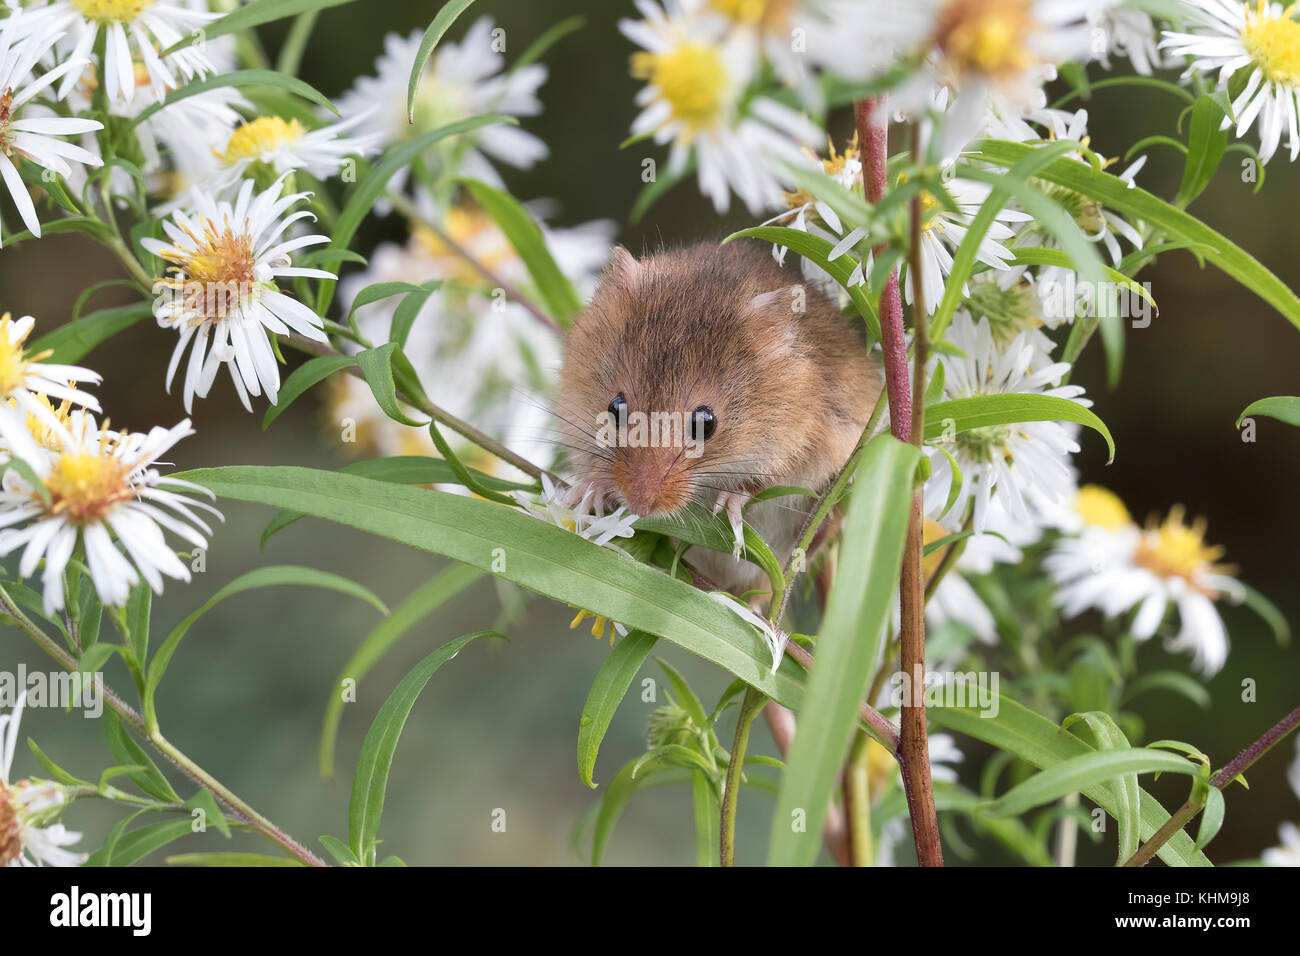 harvest mice/mouse,  Micromys minutus, close up portrait posing on a variety of plants, flowers and harvest crops. facial and group image Stock Photo